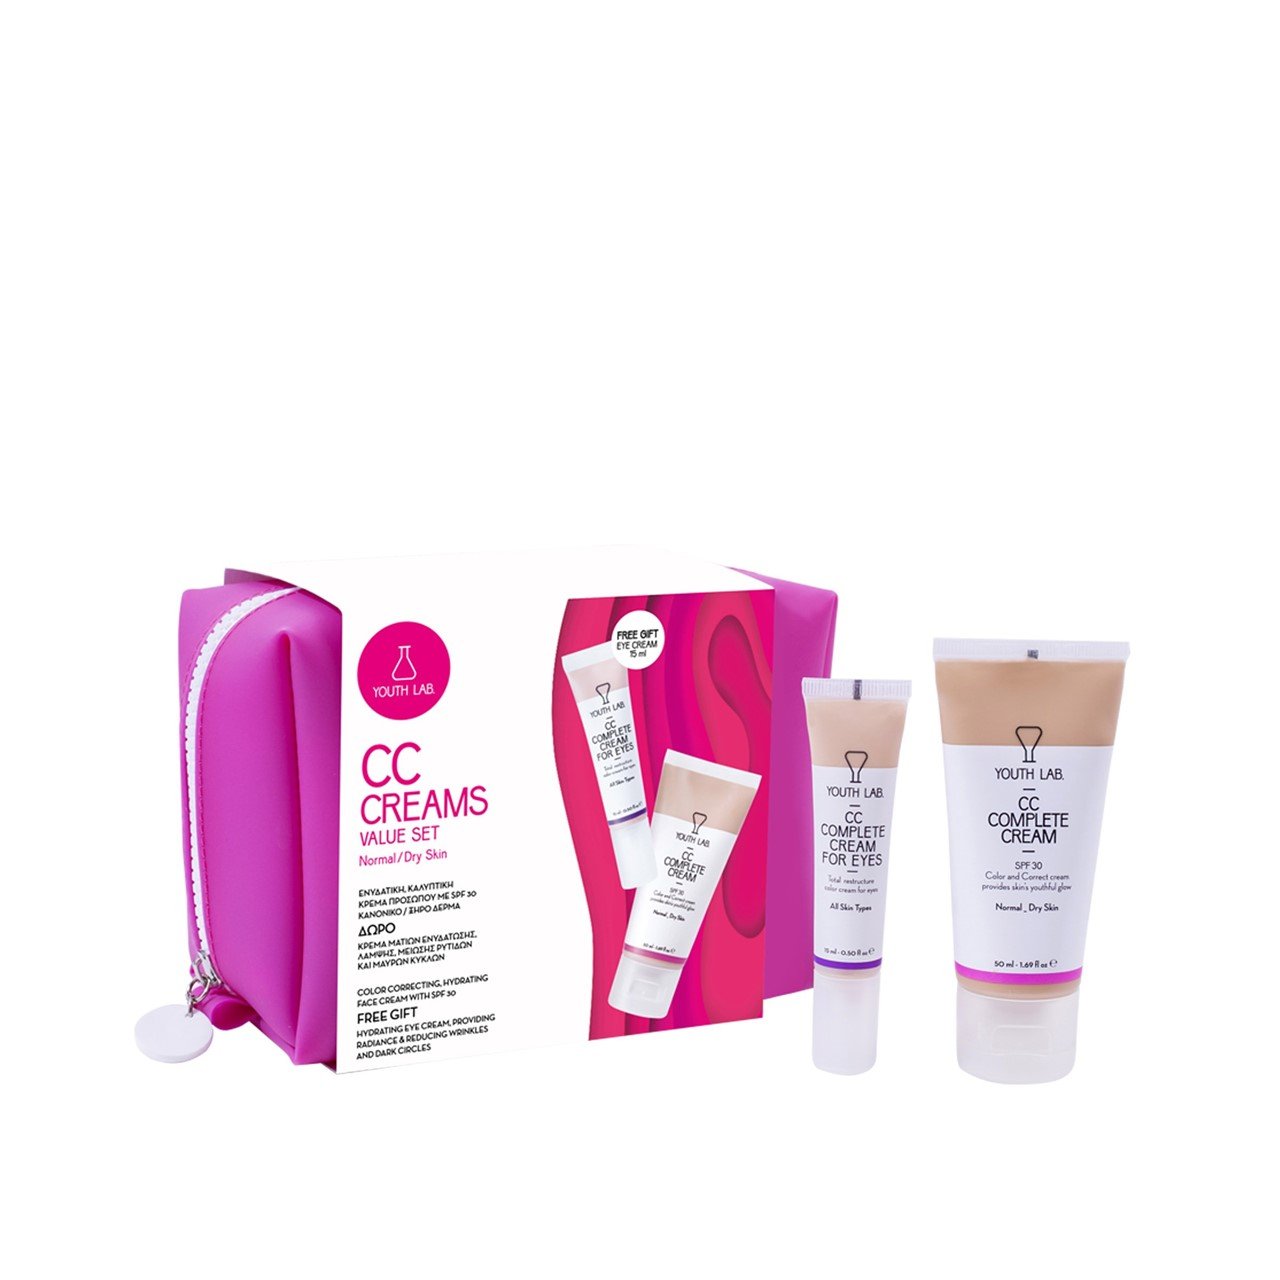 YOUTH LAB CC Creams Normal to Dry Skin Value Set